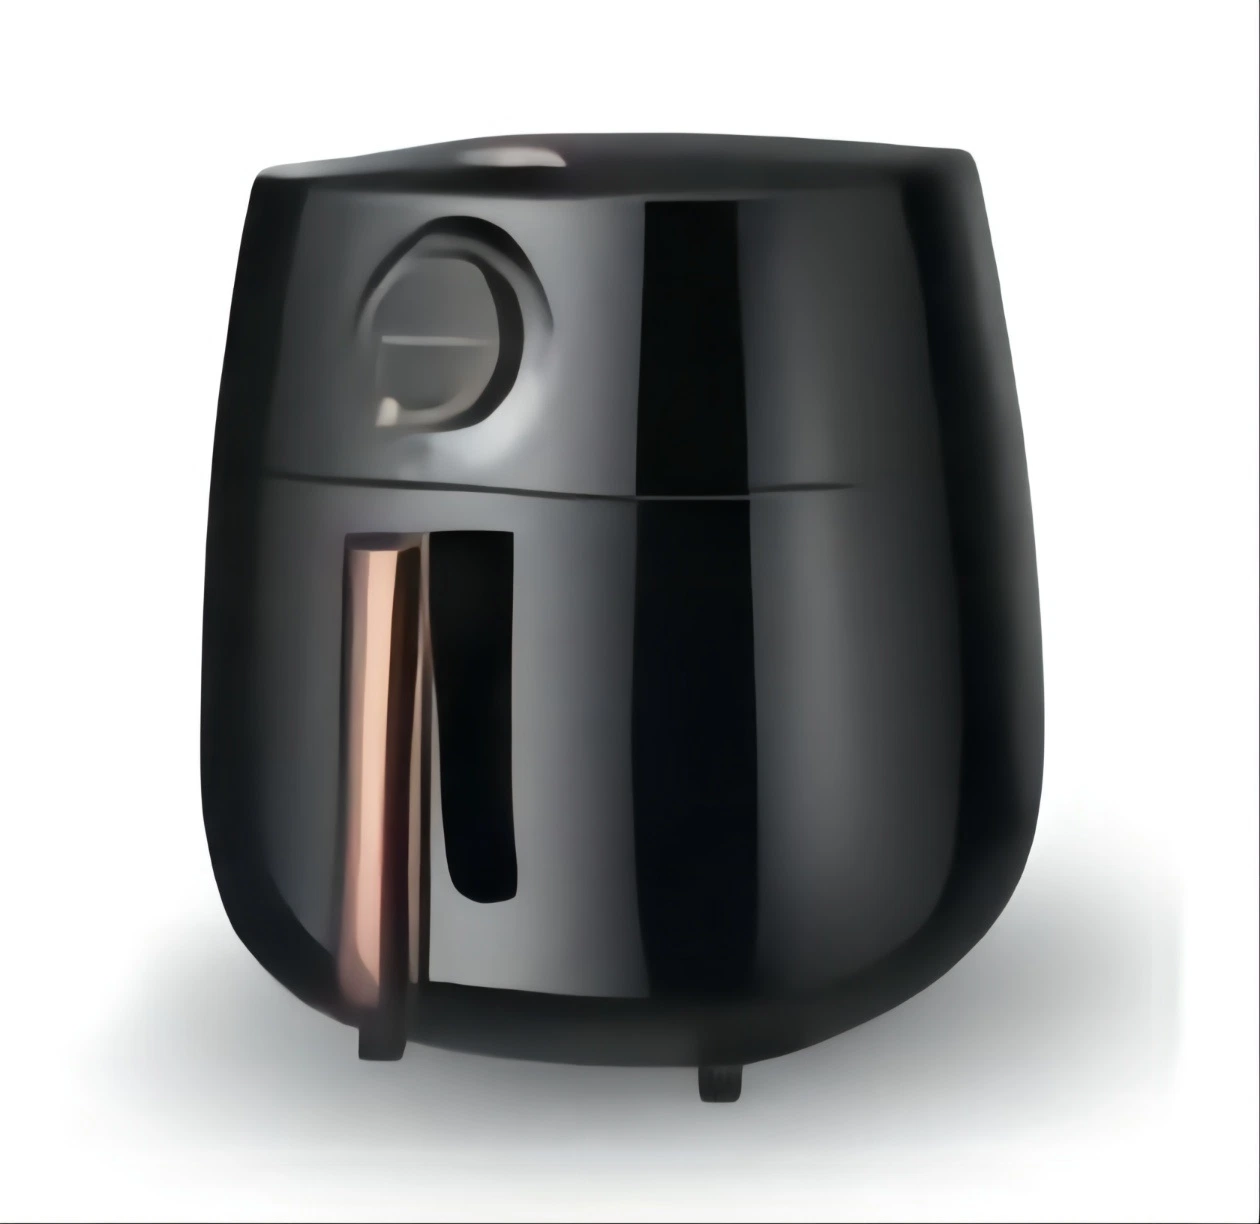 New Professional Model-Household/Home Uses-Electric Kitchen Airfryer/Appliances/Machines-Power Tools